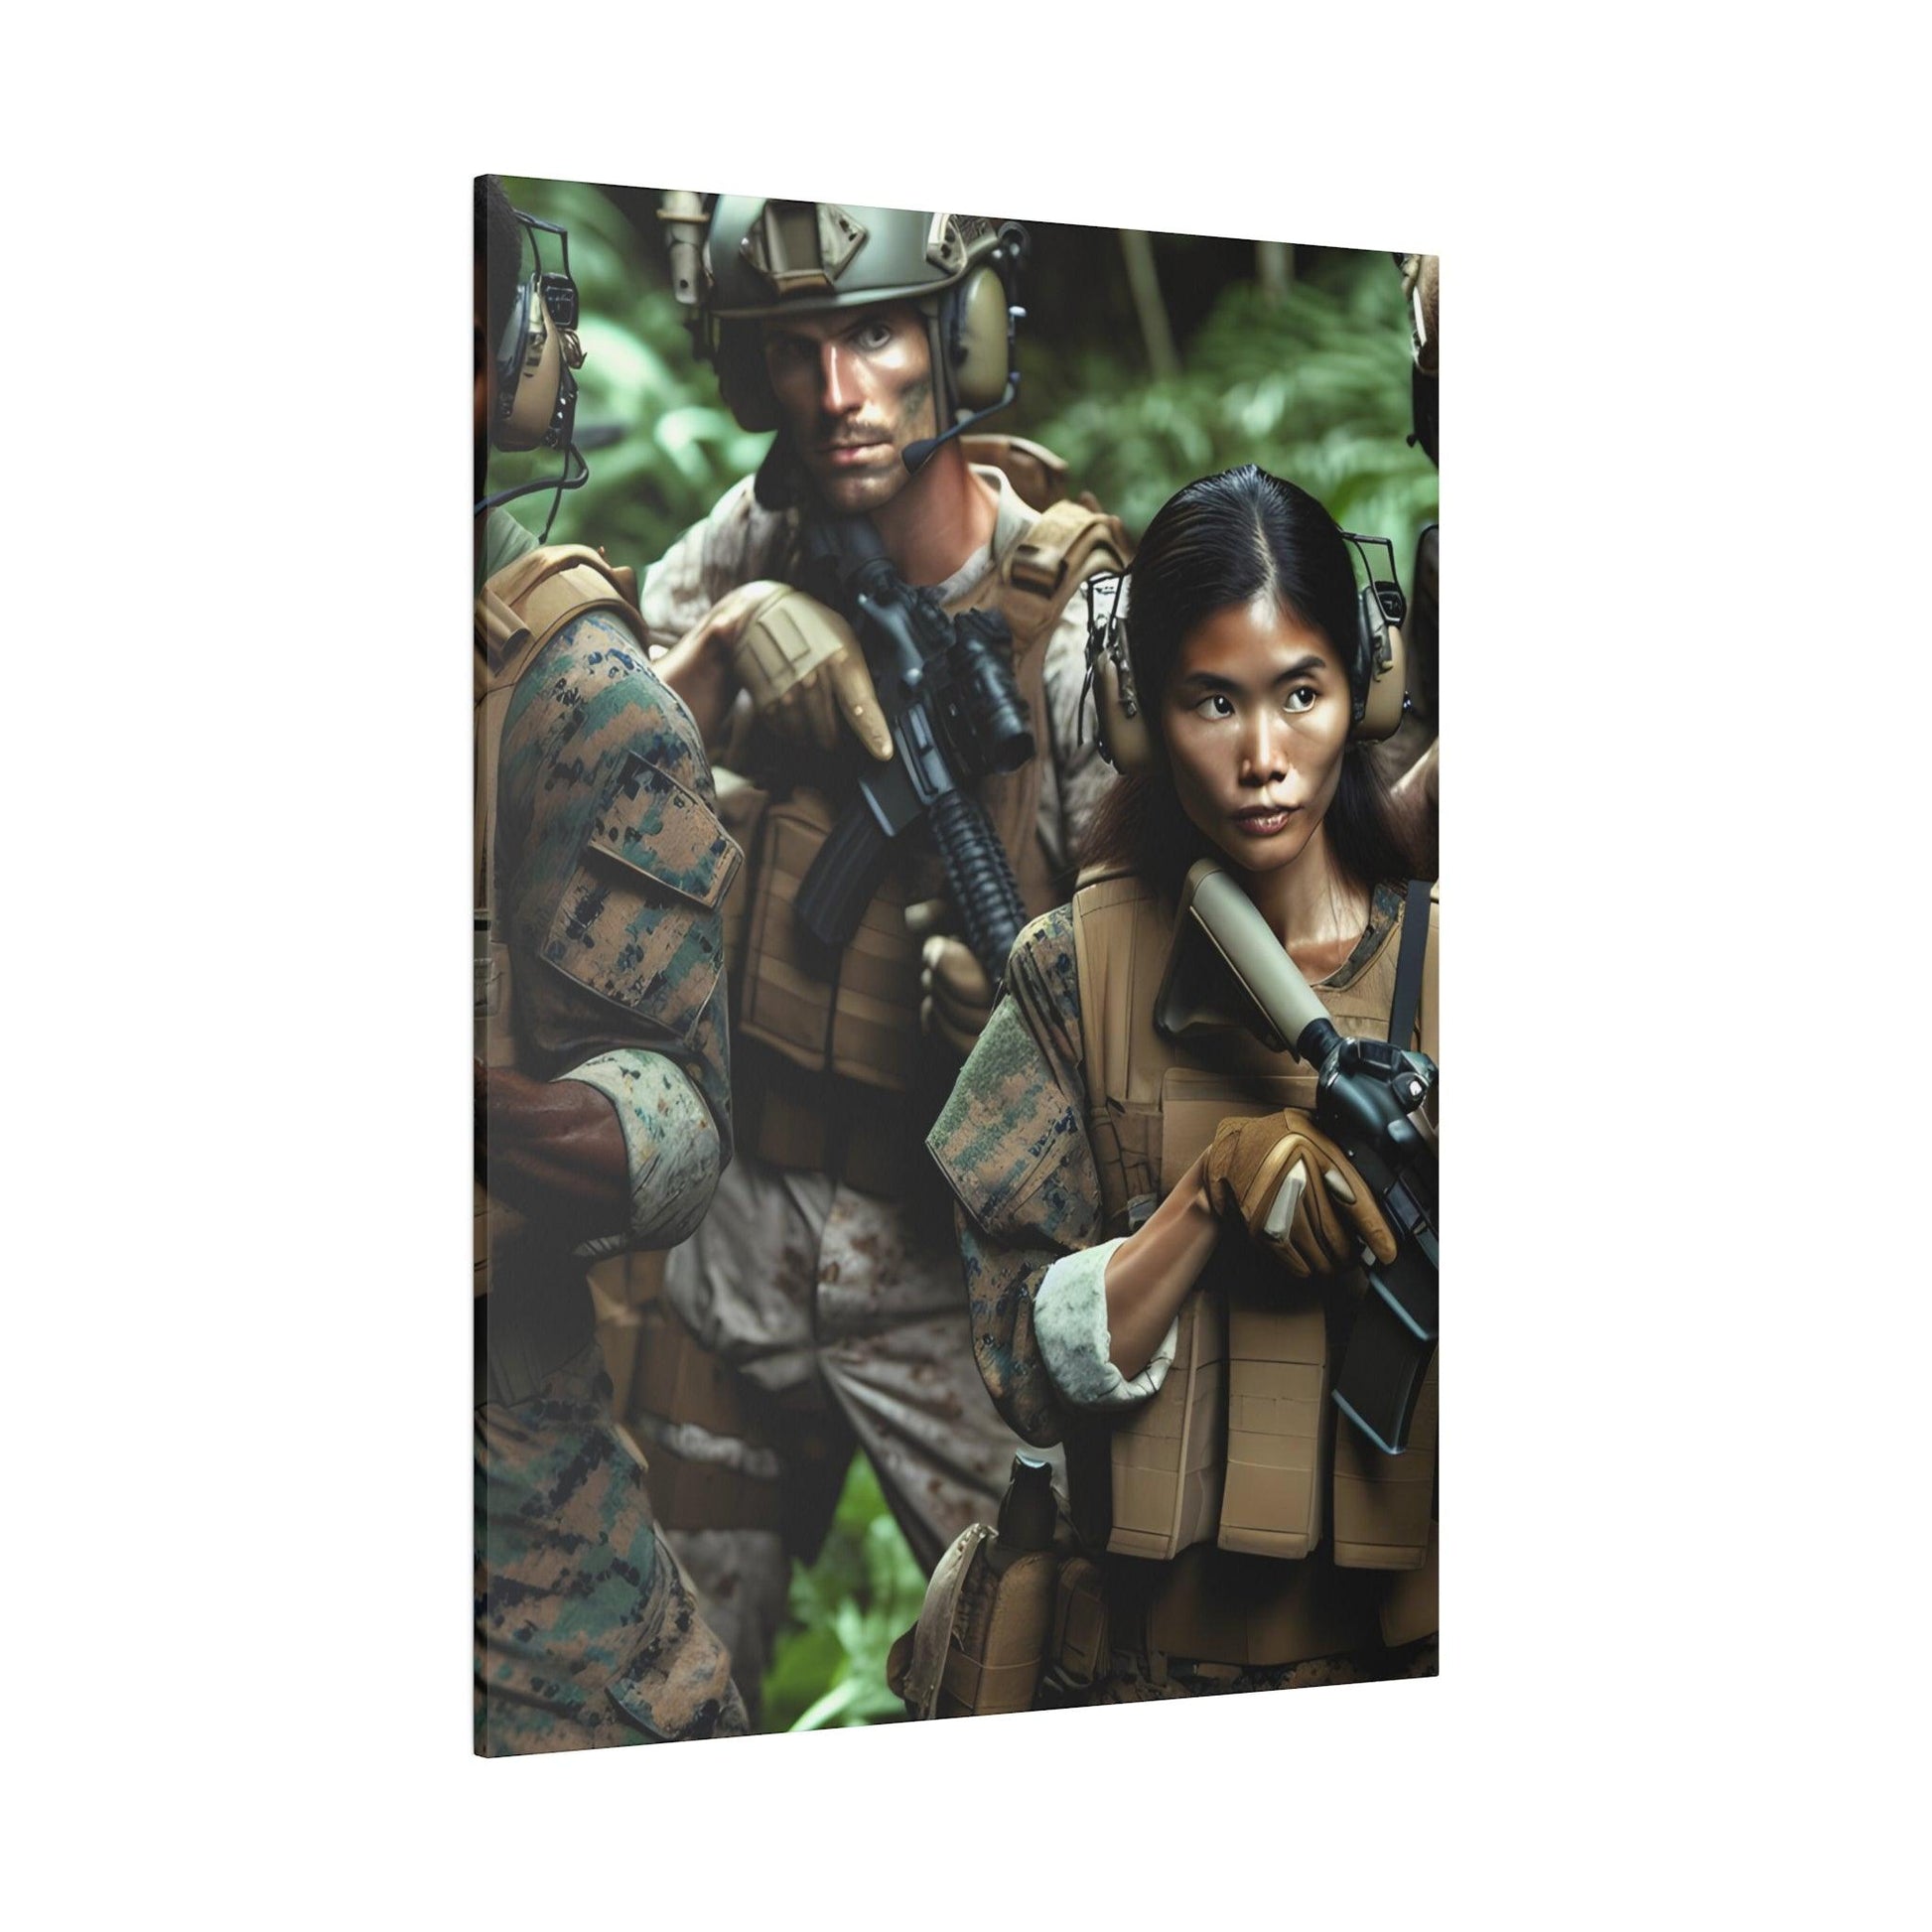 "Marine Corp Valor Visions: Inspirational Canvas Wall Art" - The Alice Gallery